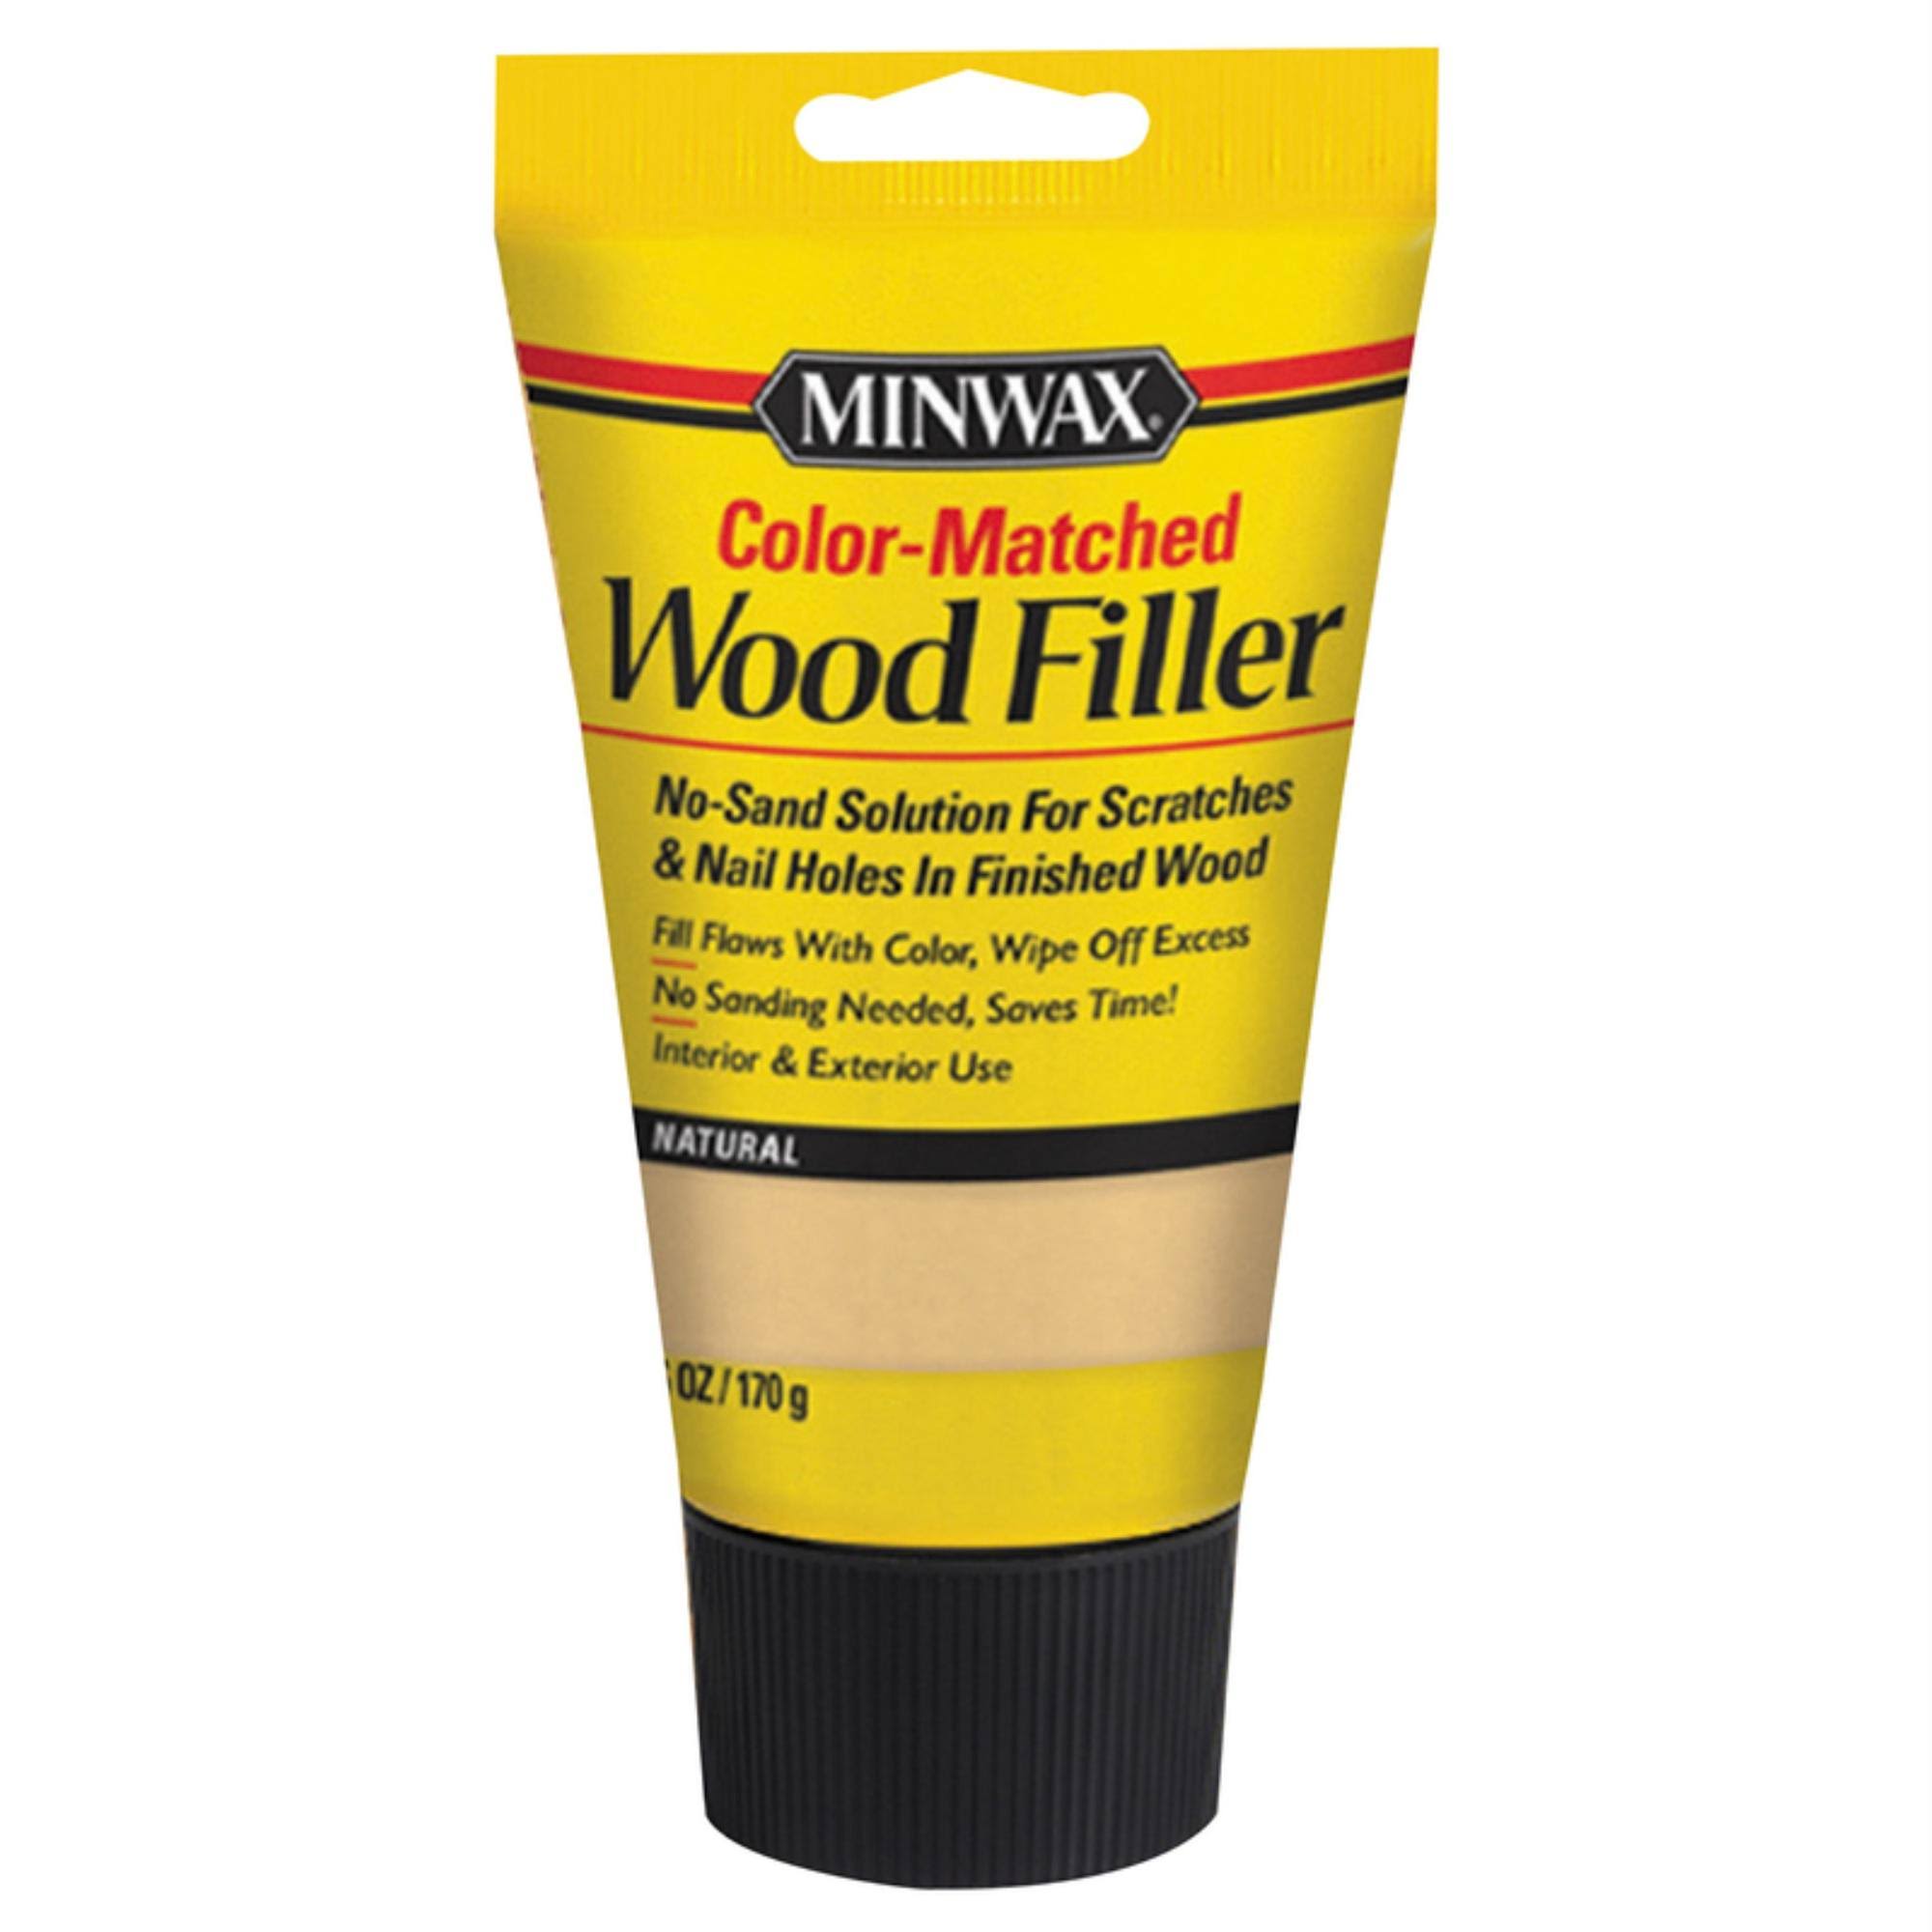 Minwax 448520000 Color-Matched Filler Wood Putty, Natural 6 Oz